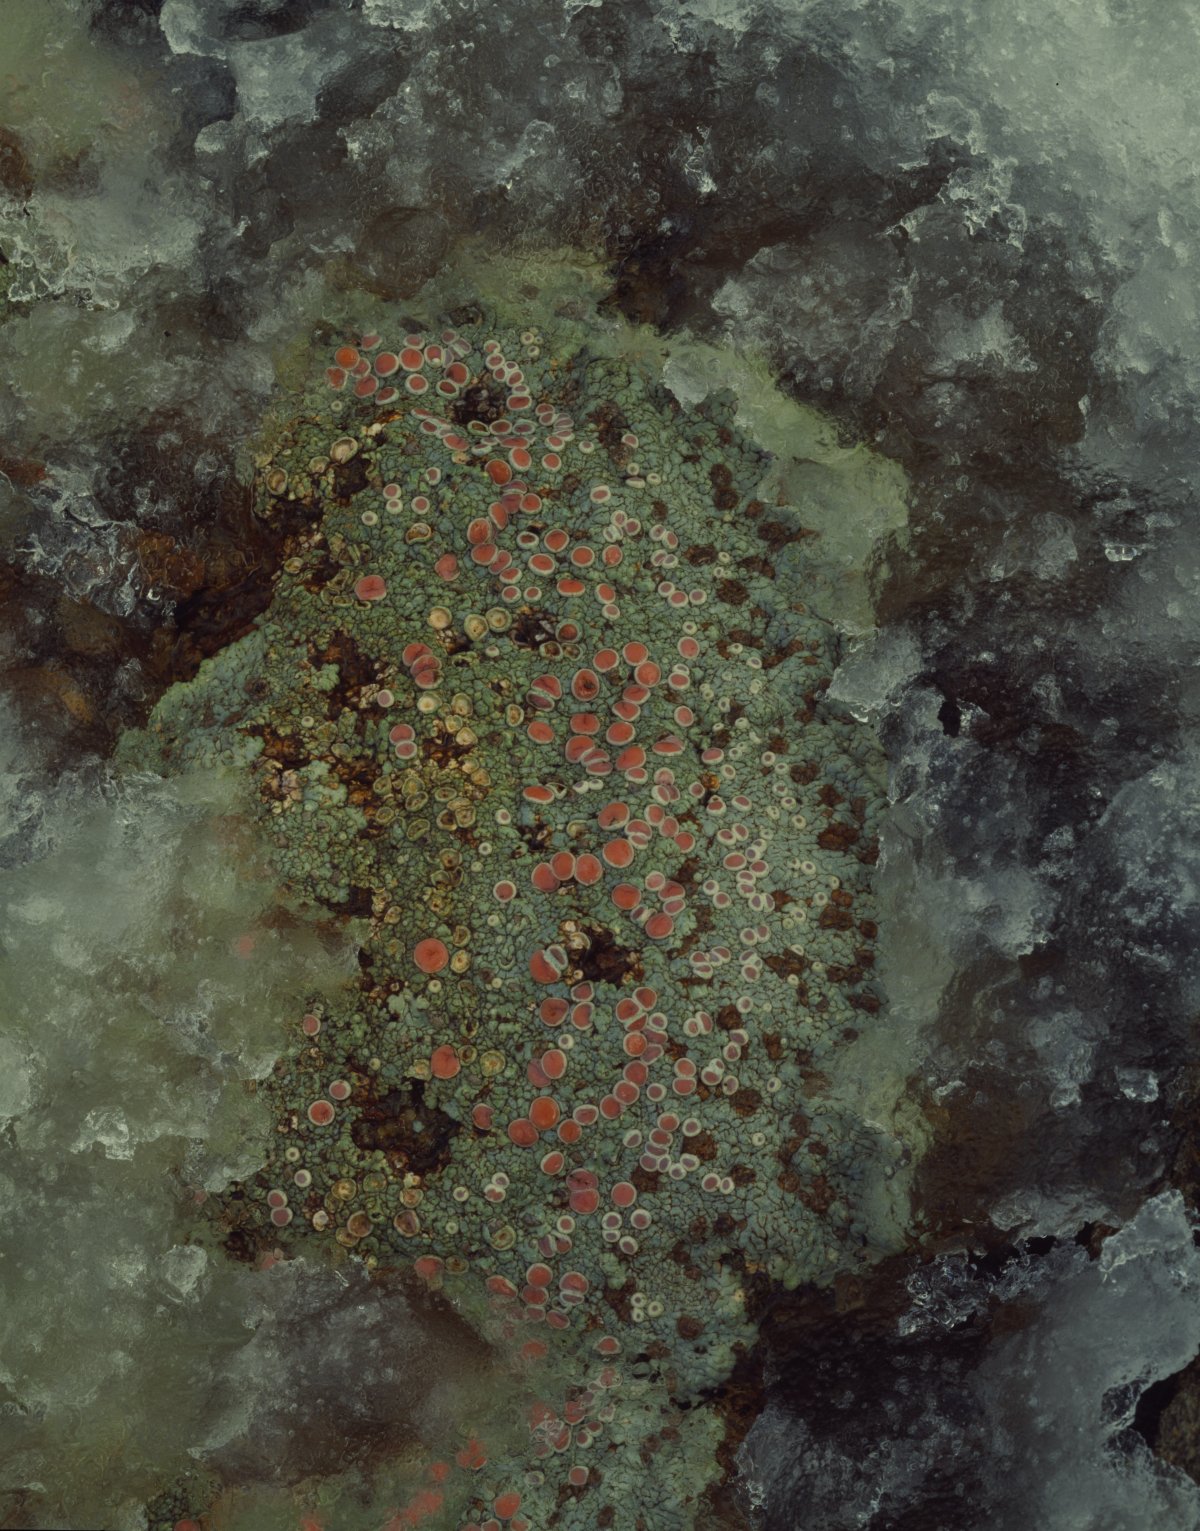 Pink and green lichen growing on a dark grey rock. The lichen is surrounded by ice.